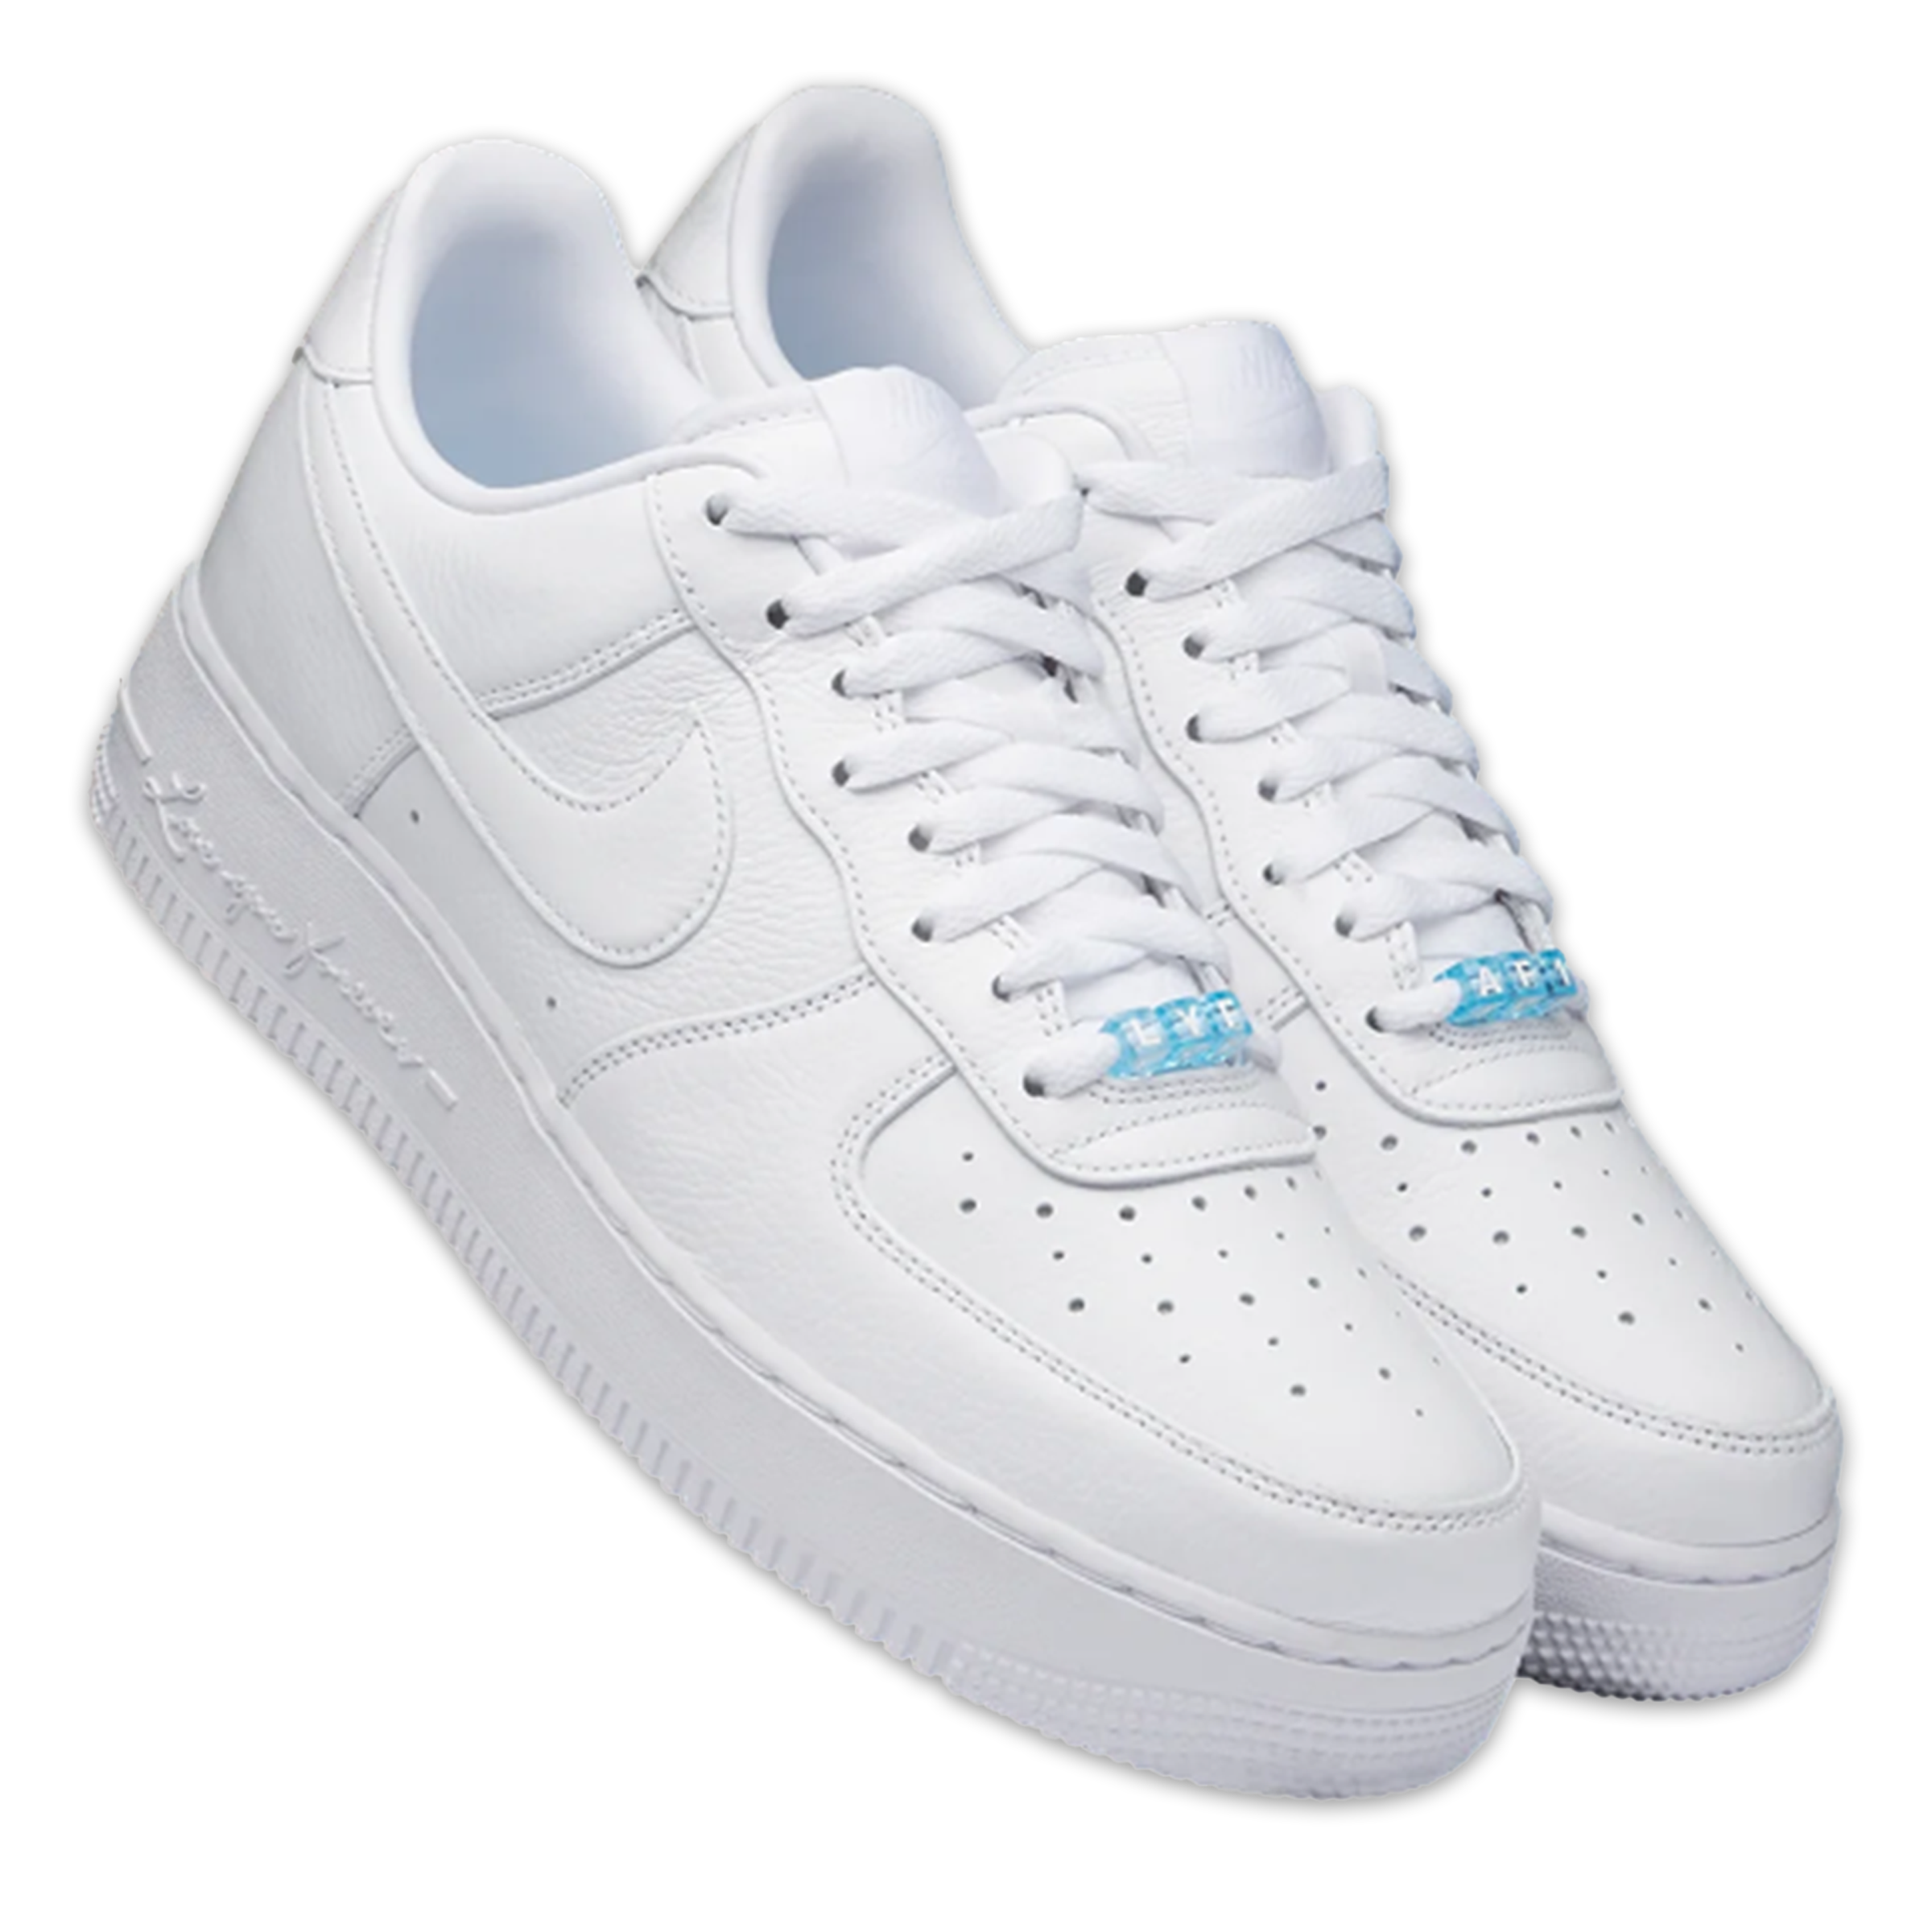 NOCTA x Nike Air Force 1 Low - "Certified Lover Boy"